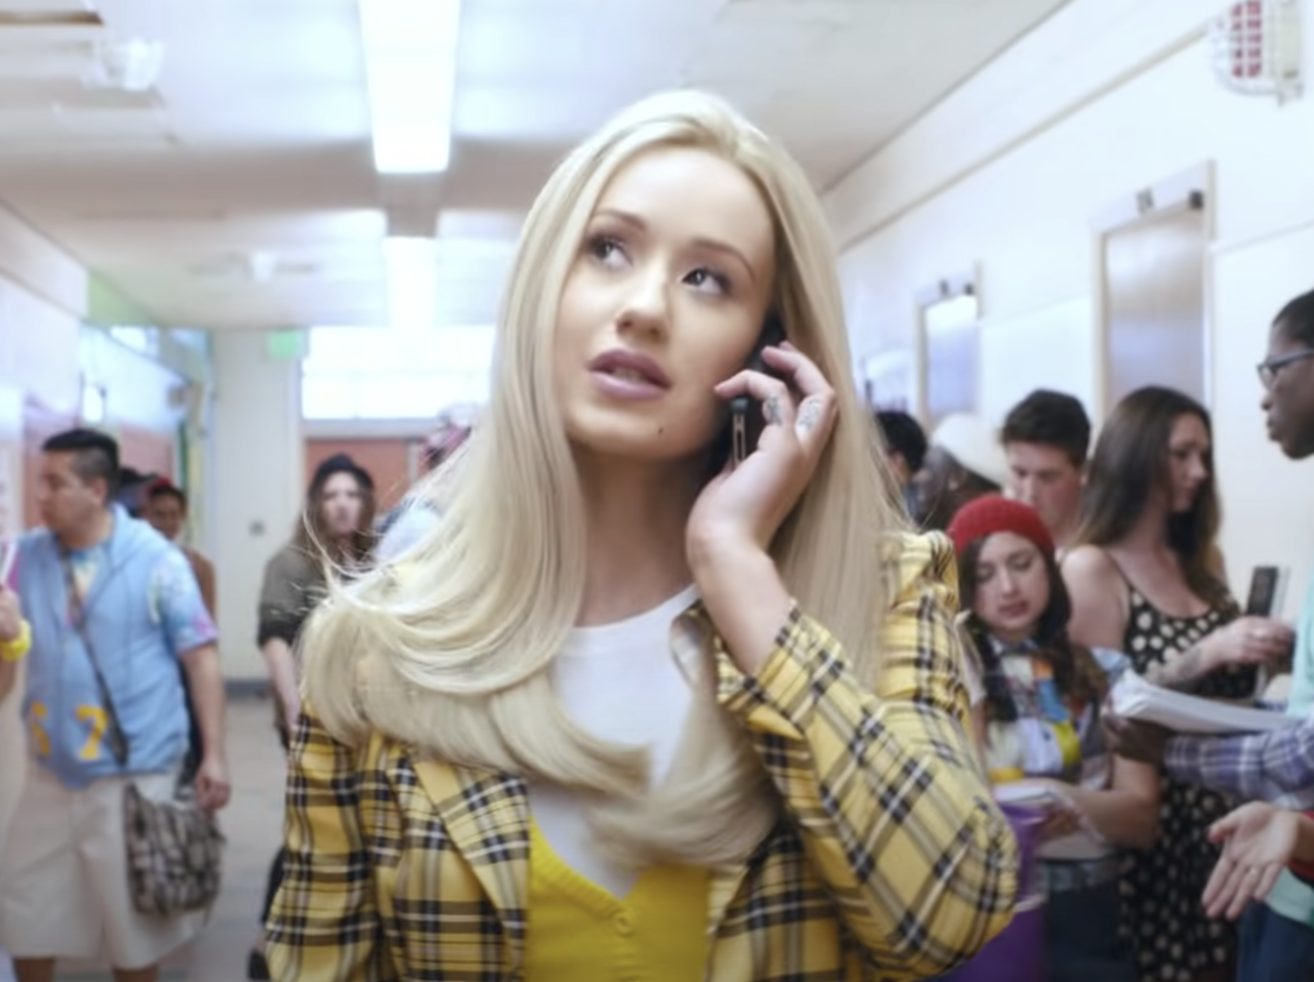 Iggy dressed up like Cher from Clueless and talking on a cellphone in the Fancy music video